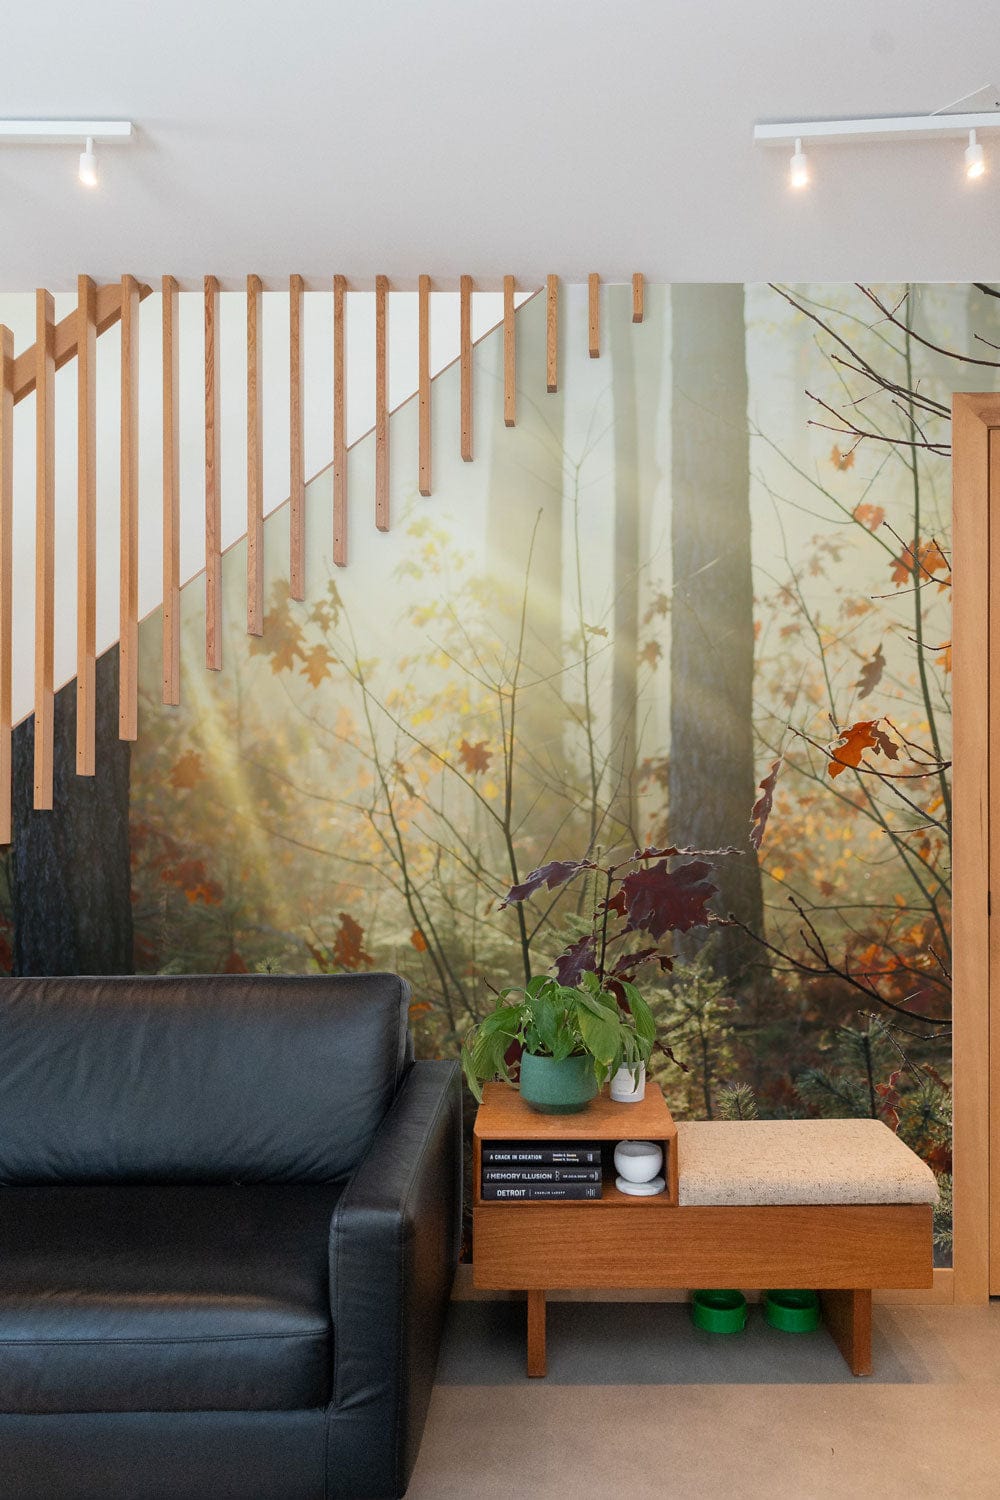 Wallpaper mural for the living room that depicts plants enjoying the fall sunshine.